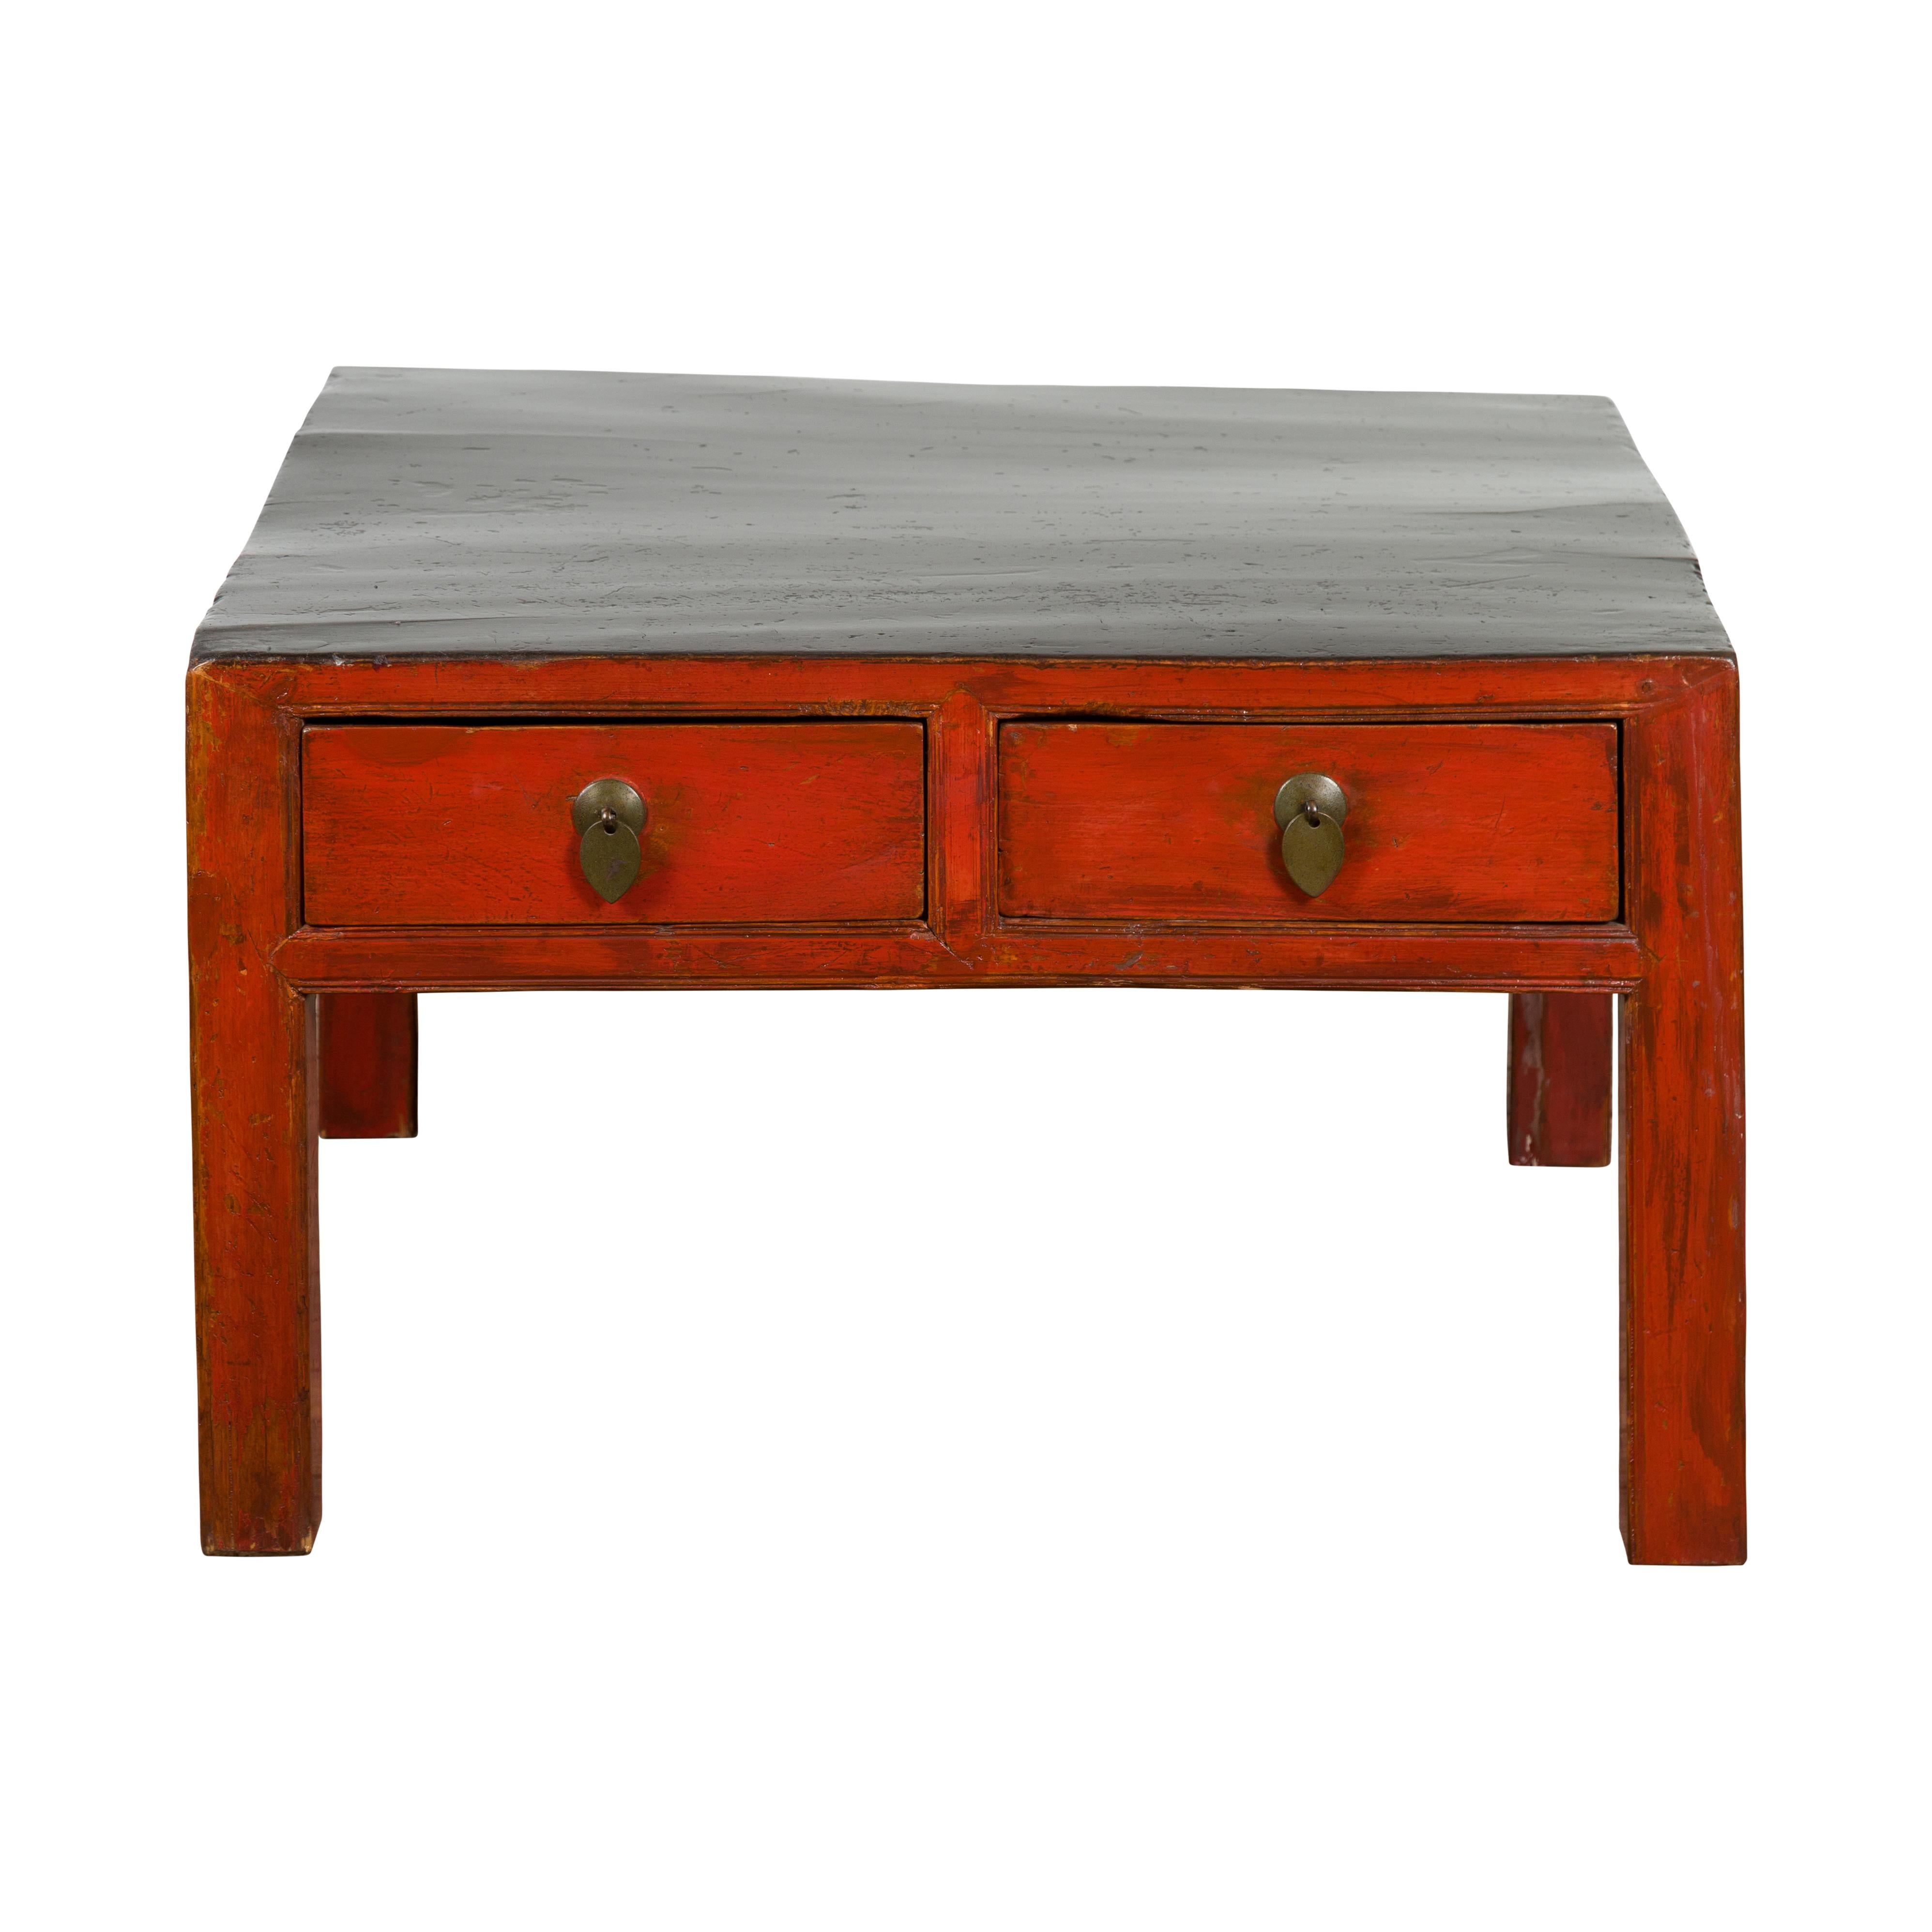 A Chinese Qing Dynasty period red and black lacquer coffee table from the 19th century, with four drawers, brass hardware and straight legs. Experience the timeless elegance of this Chinese Qing Dynasty period lacquer coffee table from the 19th